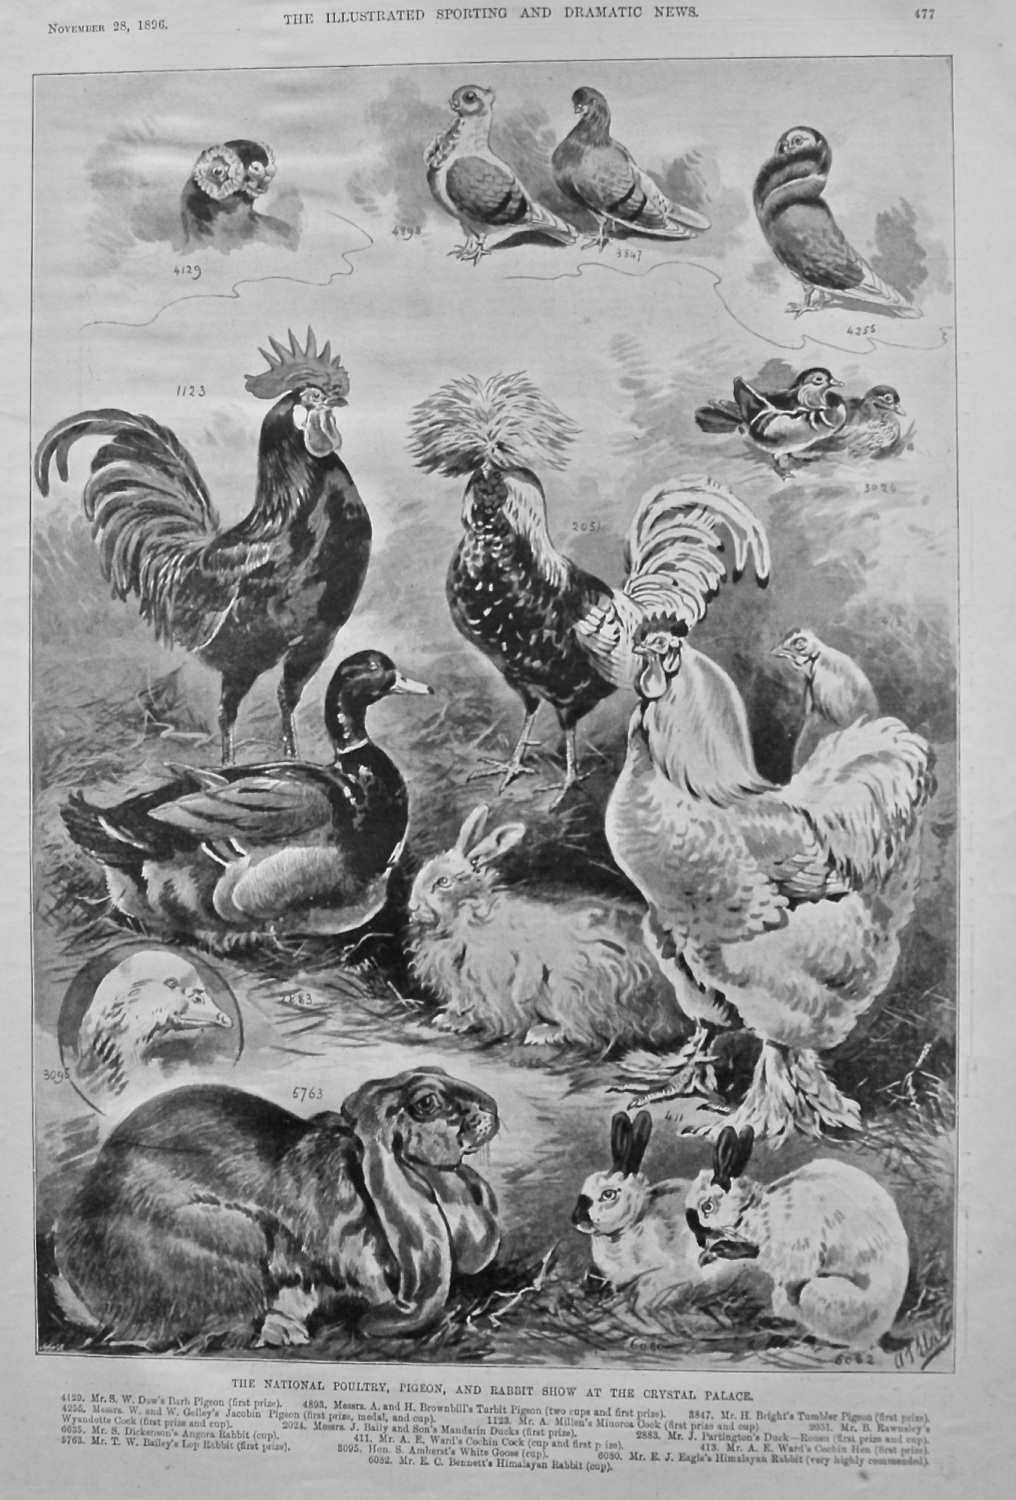 The National Poultry, Pigeon, and Rabbit show at the Crystal Palace. 1896.